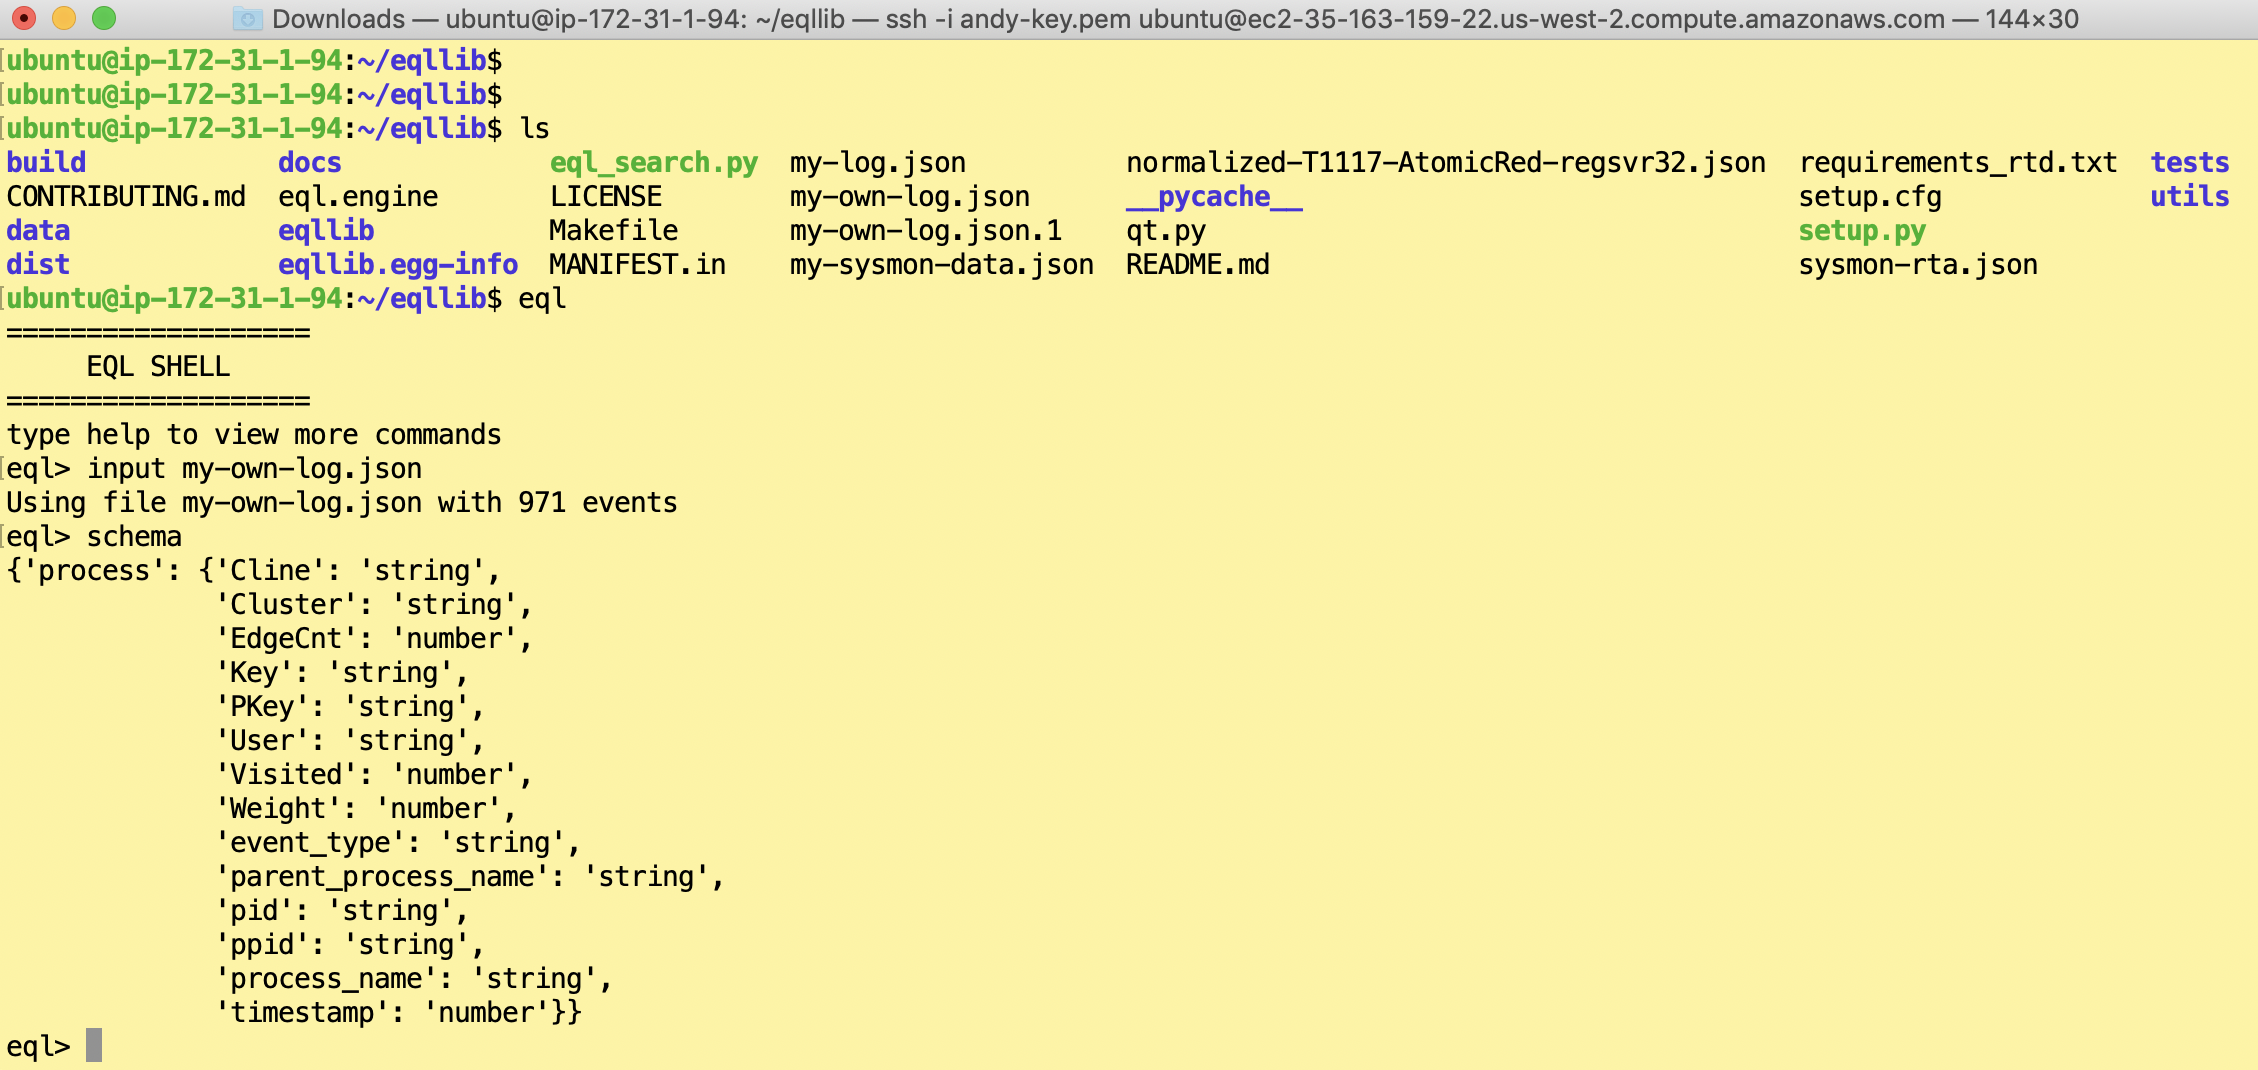 Input the raw JSON log, and check the schema just to see that it recognizes field names